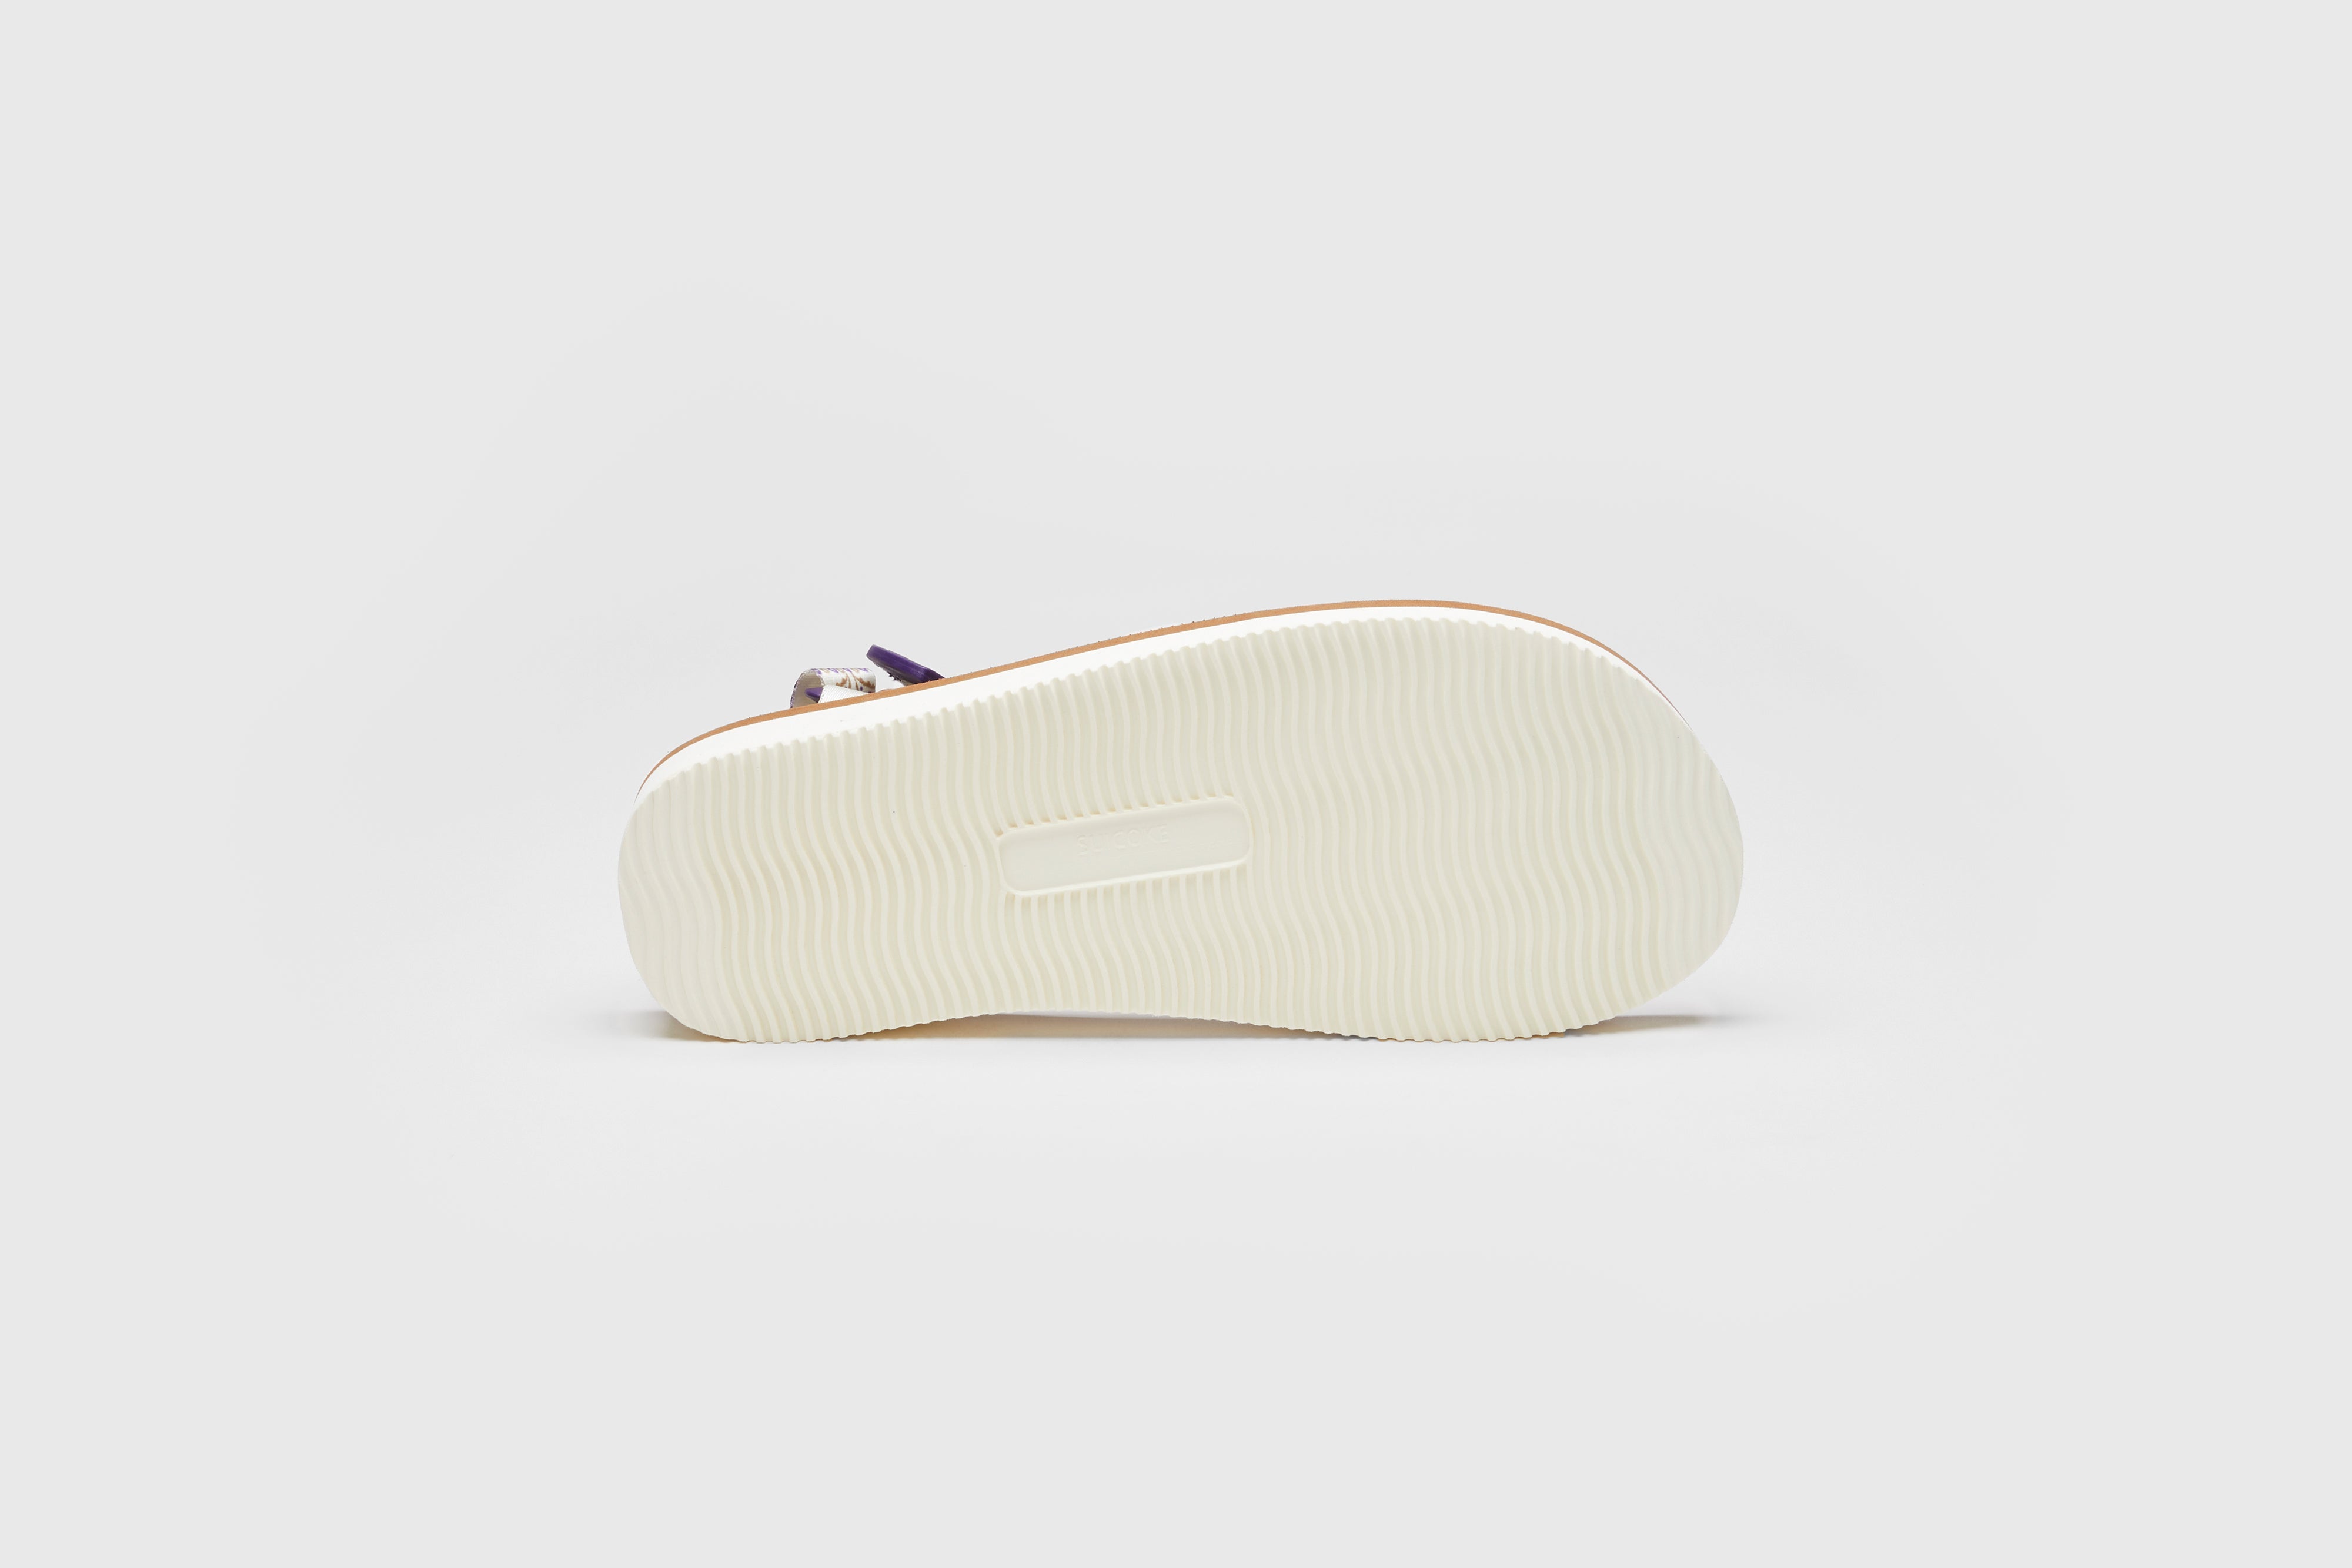 SUICOKE MOTO-PO slides with ivory & brown nylon upper, ivory & brown midsole and sole, strap and logo patch. From Spring/Summer 2023 collection on eightywingold Web Store, an official partner of SUICOKE. OG-056PO IVORY X BROWN